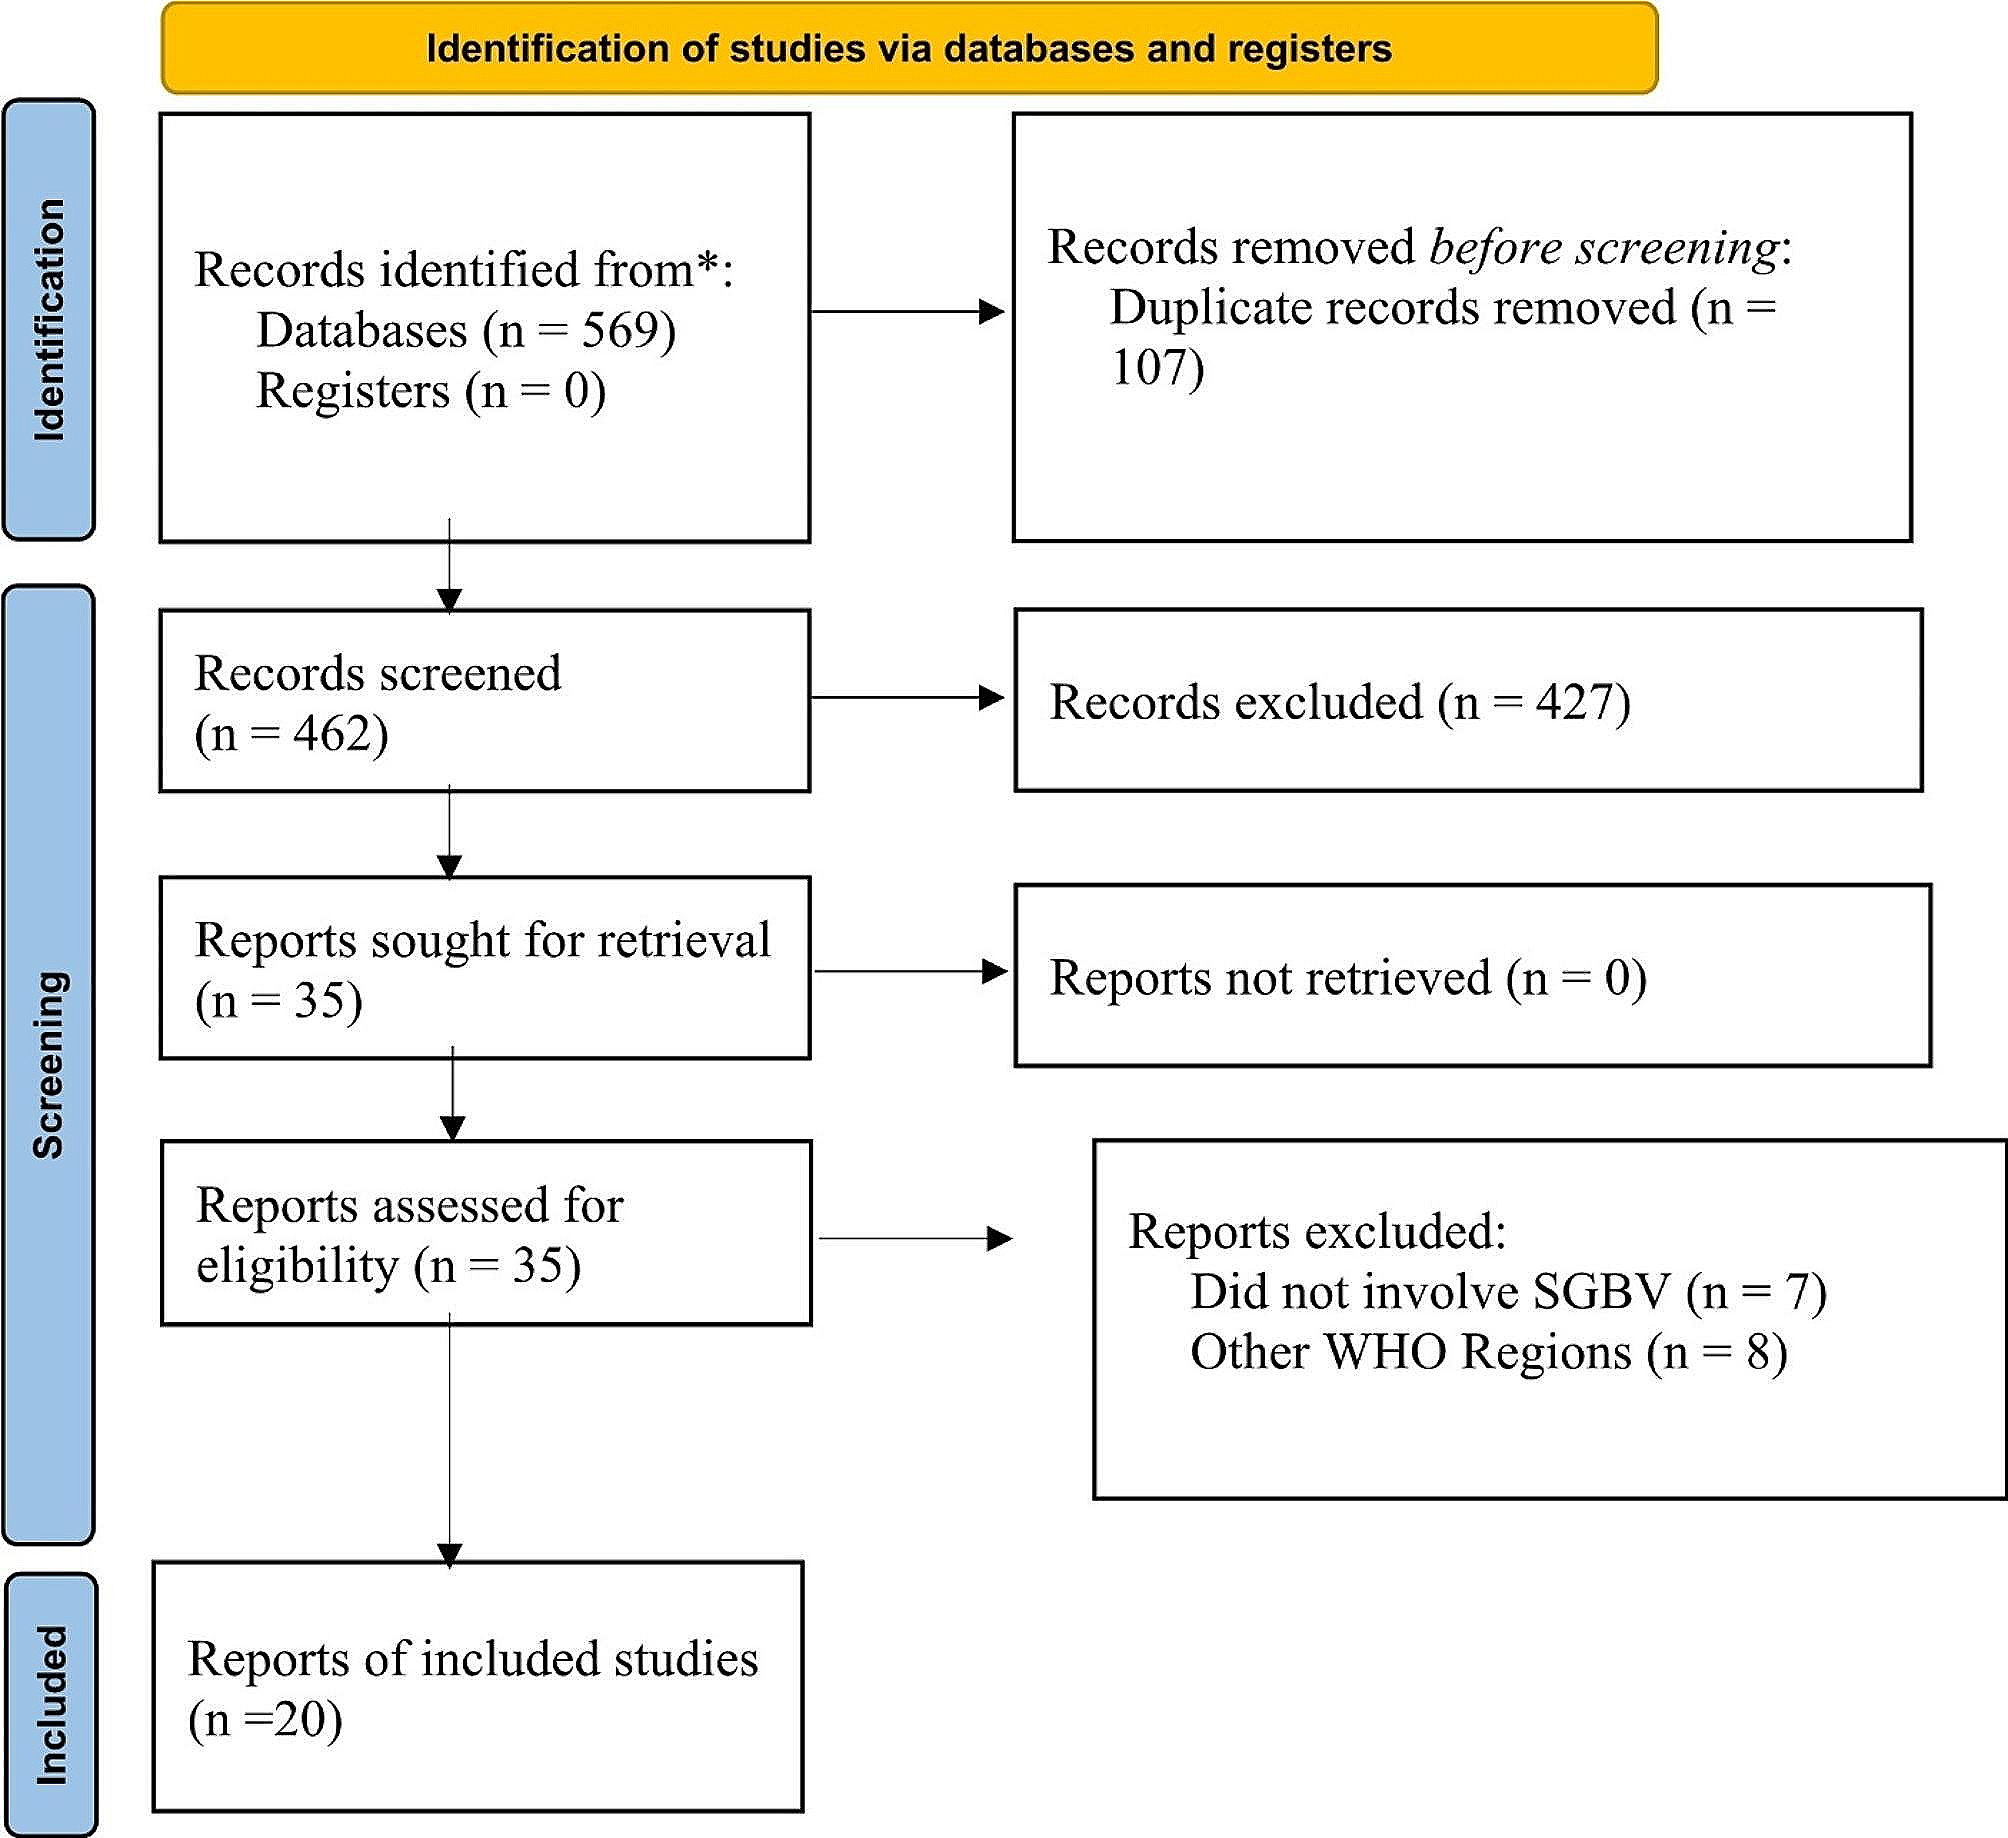 Injuries and /or trauma due to sexual gender-based violence among survivors in sub-Saharan Africa: a systematic scoping review of research evidence